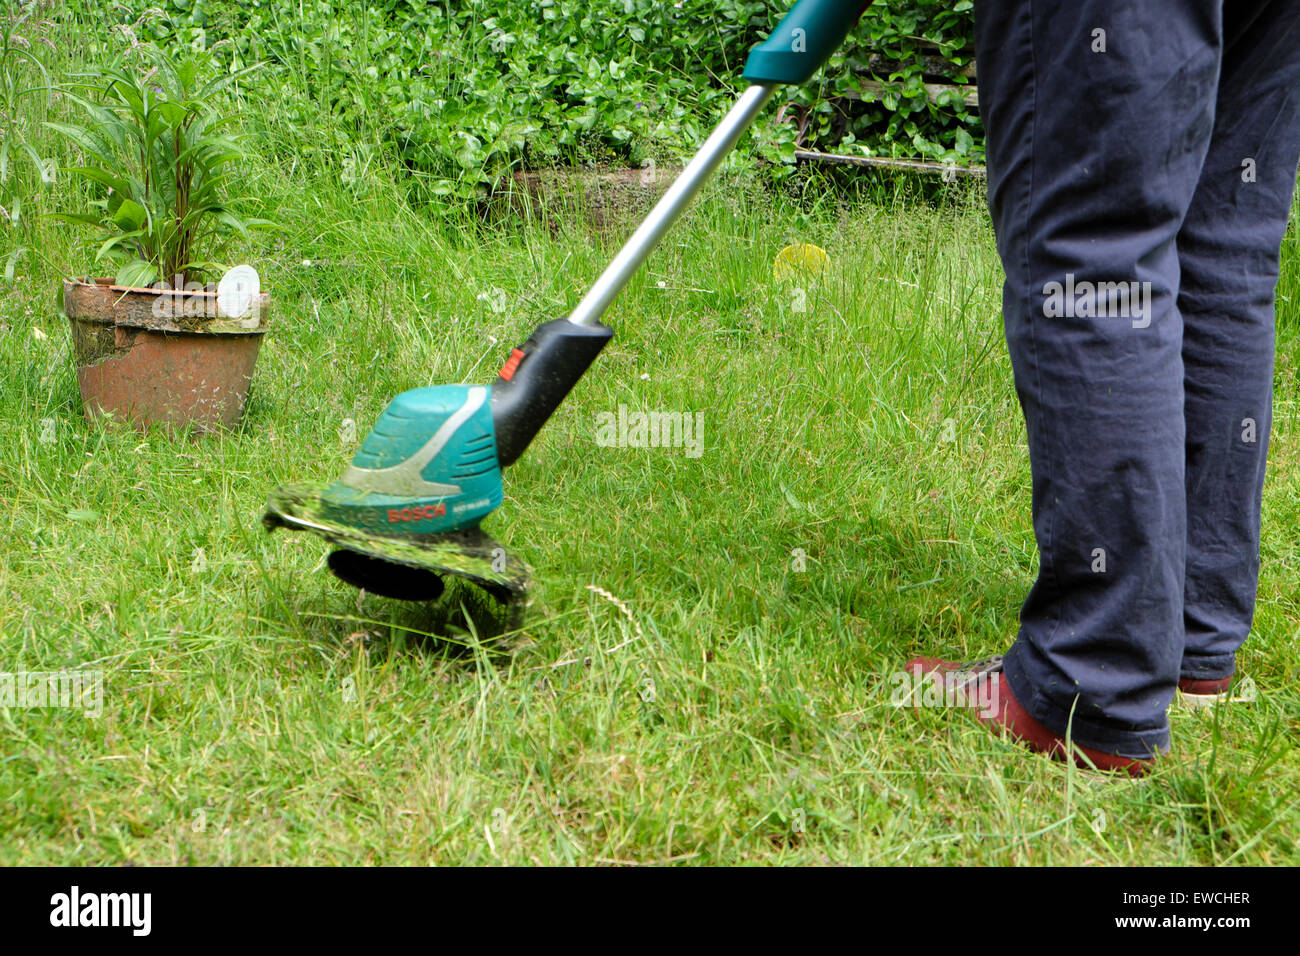 Carmarthenshire, Wales, UK. 22nd June 2015. A woman uses a strimmer to cut the grass in an overgrown garden on a fine afternoon in rural West Wales.  Tuesday is forecast to be a day of full sunshine in a week of unsettled weather in Carmarthenshire Wales..   Kathy deWitt/AlamyLiveNews Stock Photo